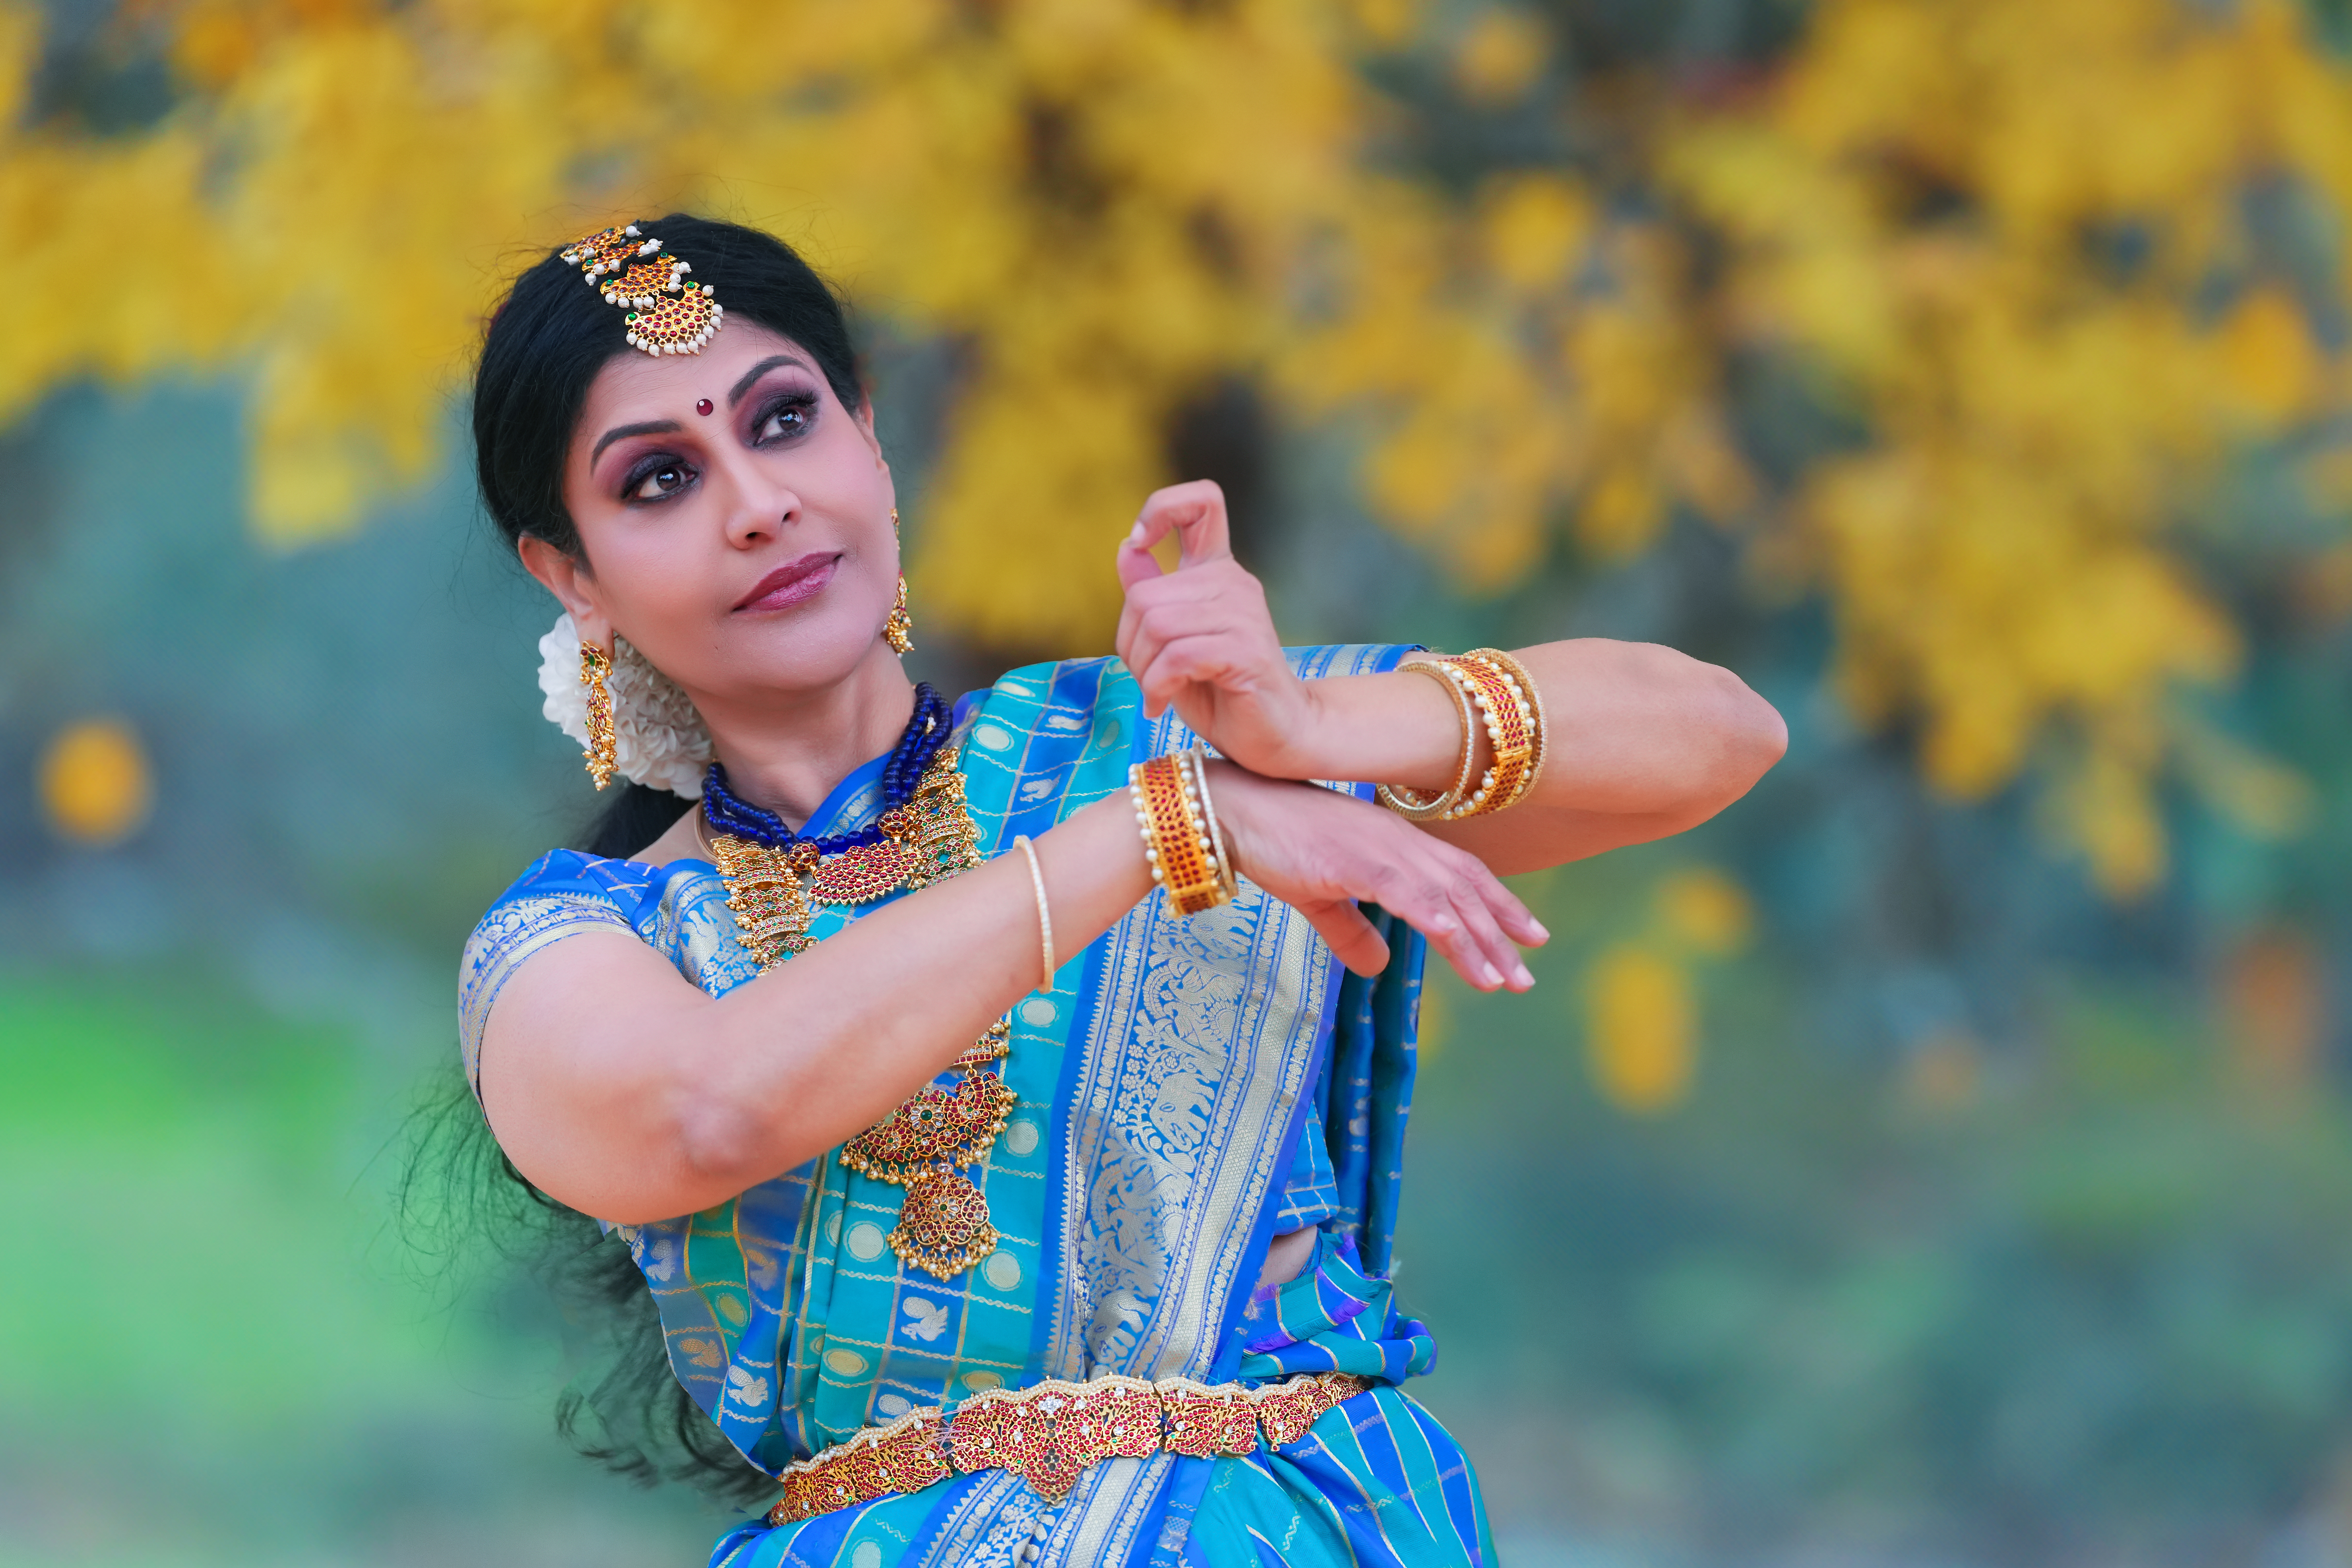 A picture of Jayanthi dancing.